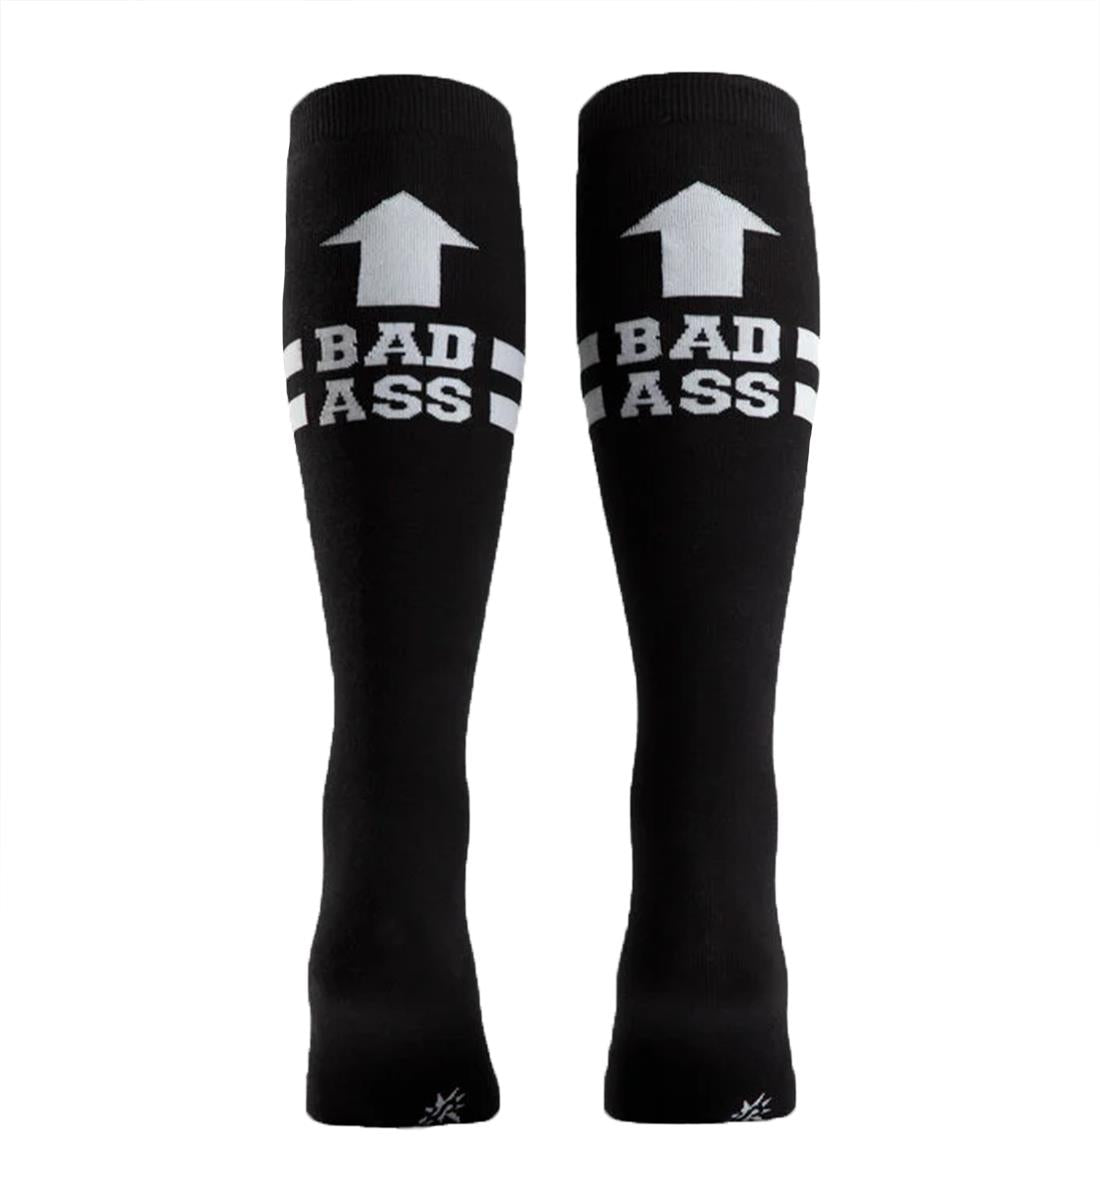 SOCK it to me Unisex Stretch-It Knee High Socks (s0014),Bad Ass - Bad Ass,One Size